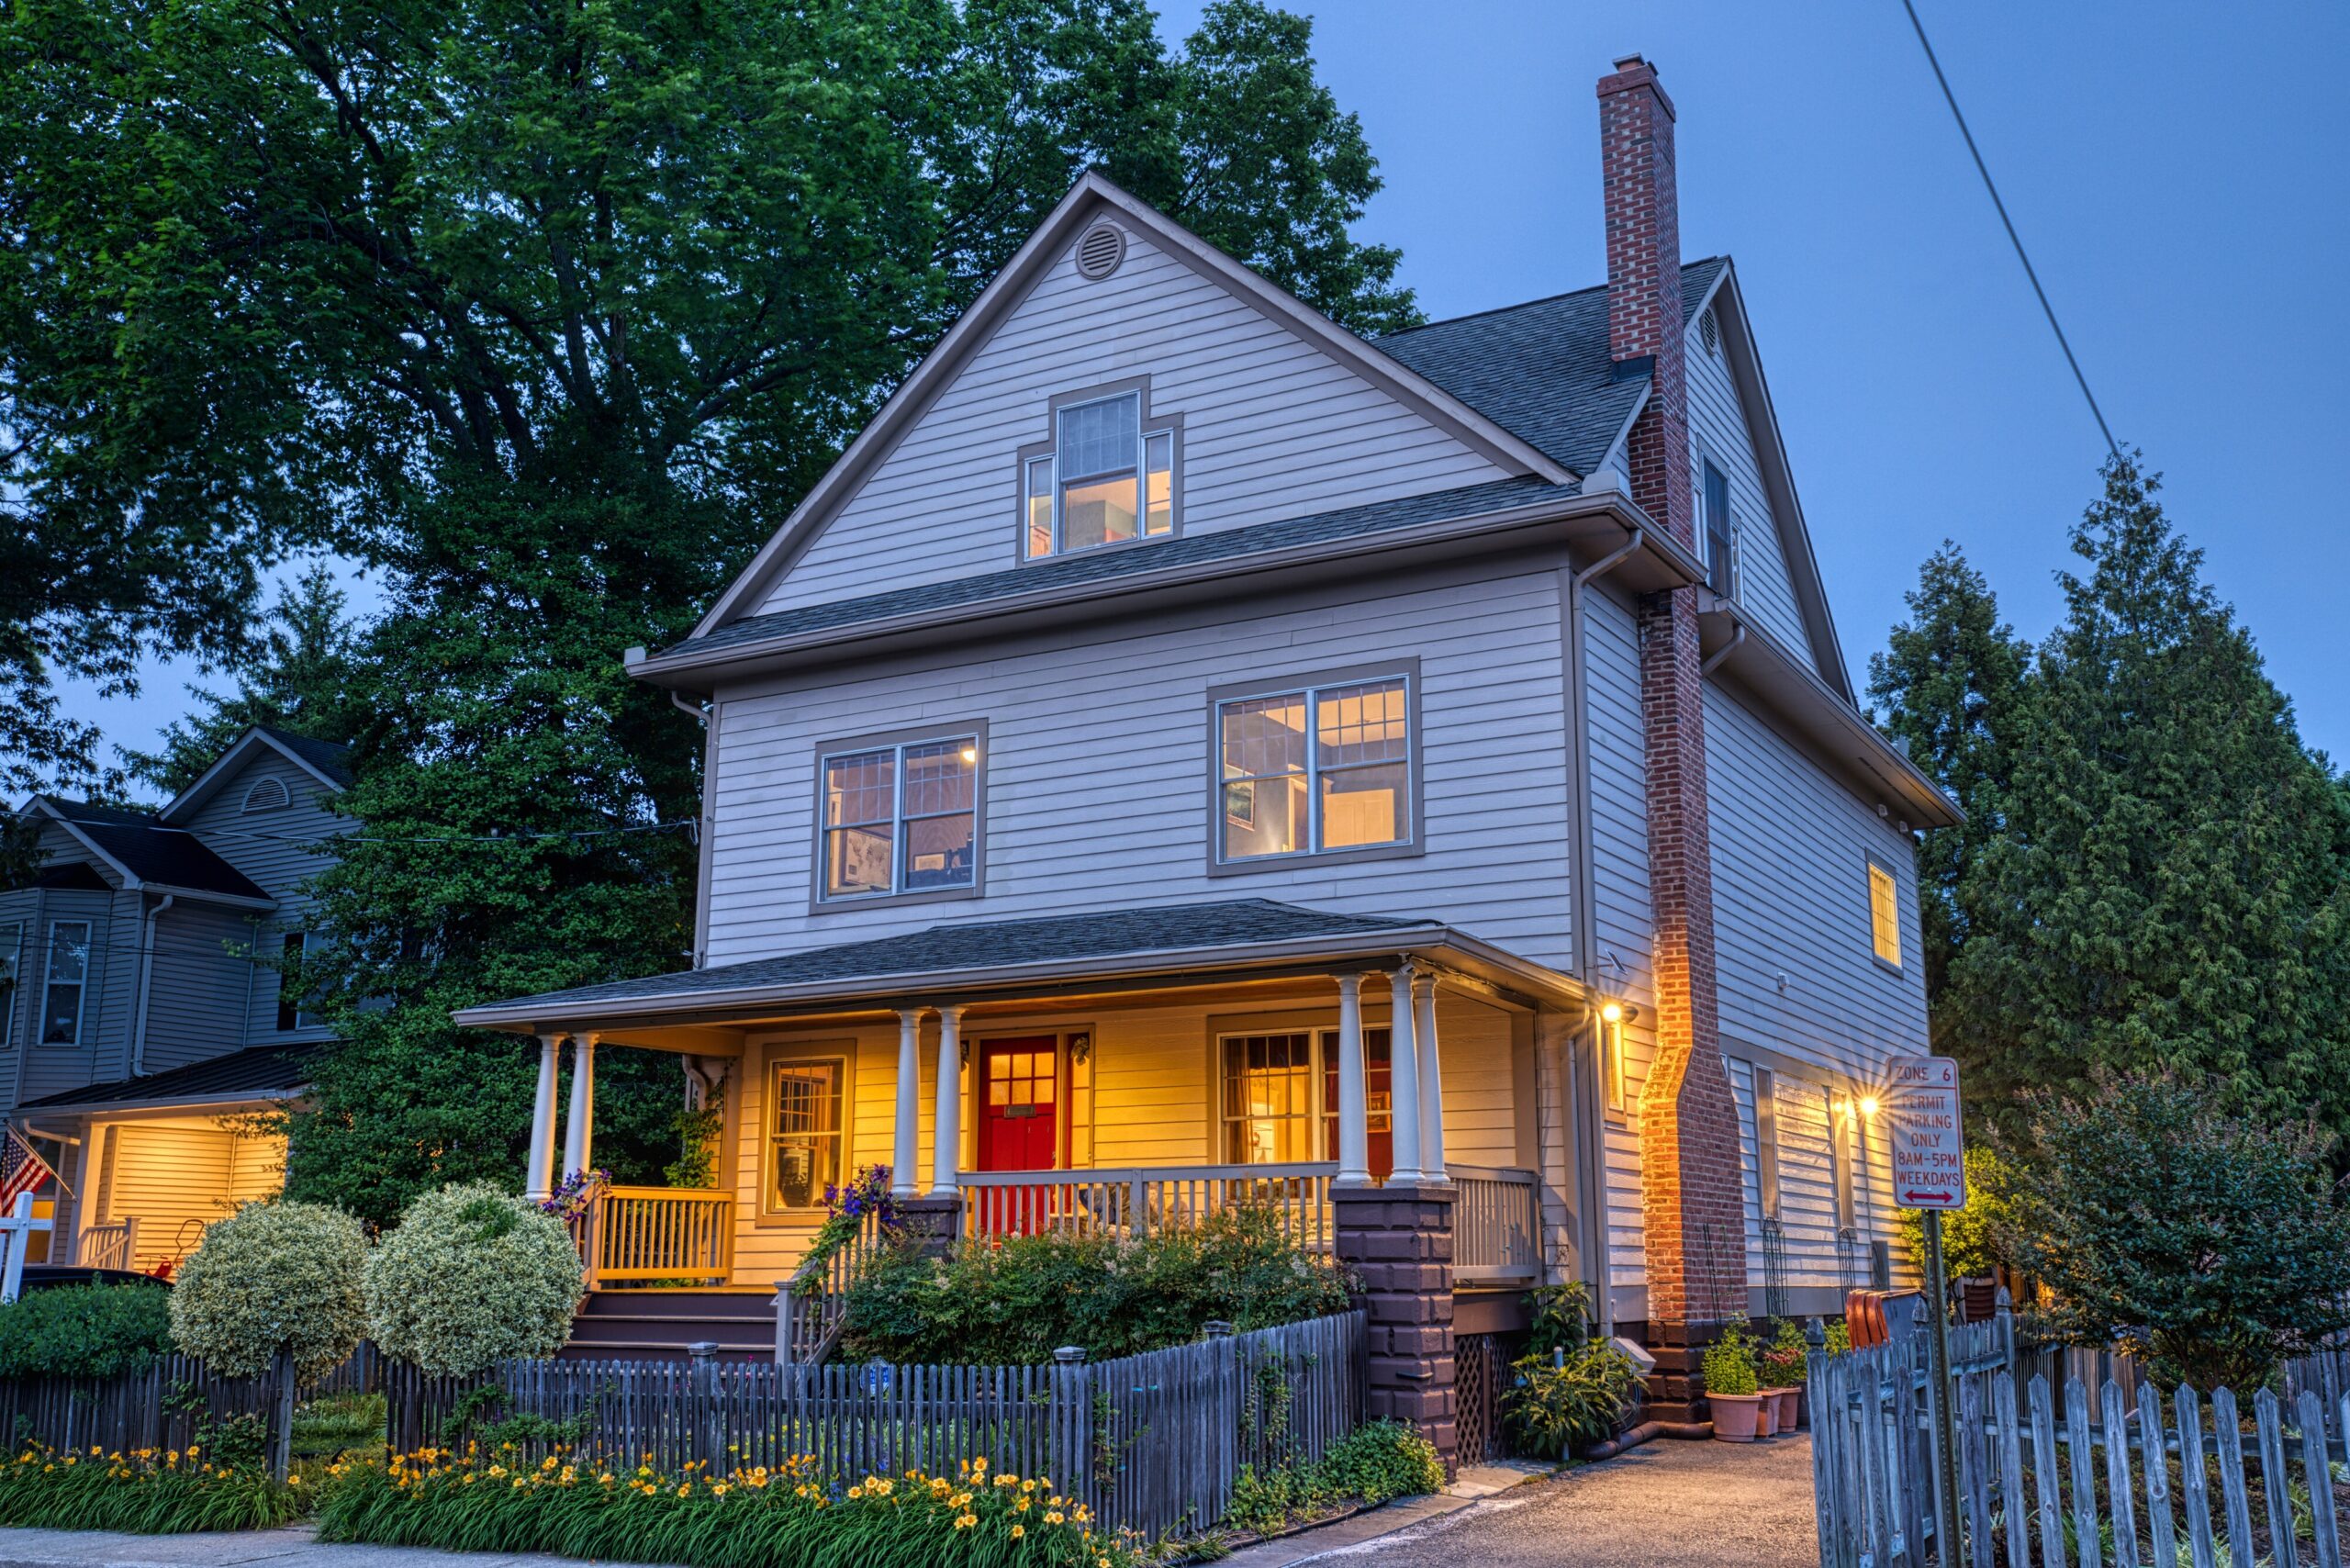 Professional exterior photo taken at dusk of 819 N Fillmore St - Showing the front of the home at the right angle